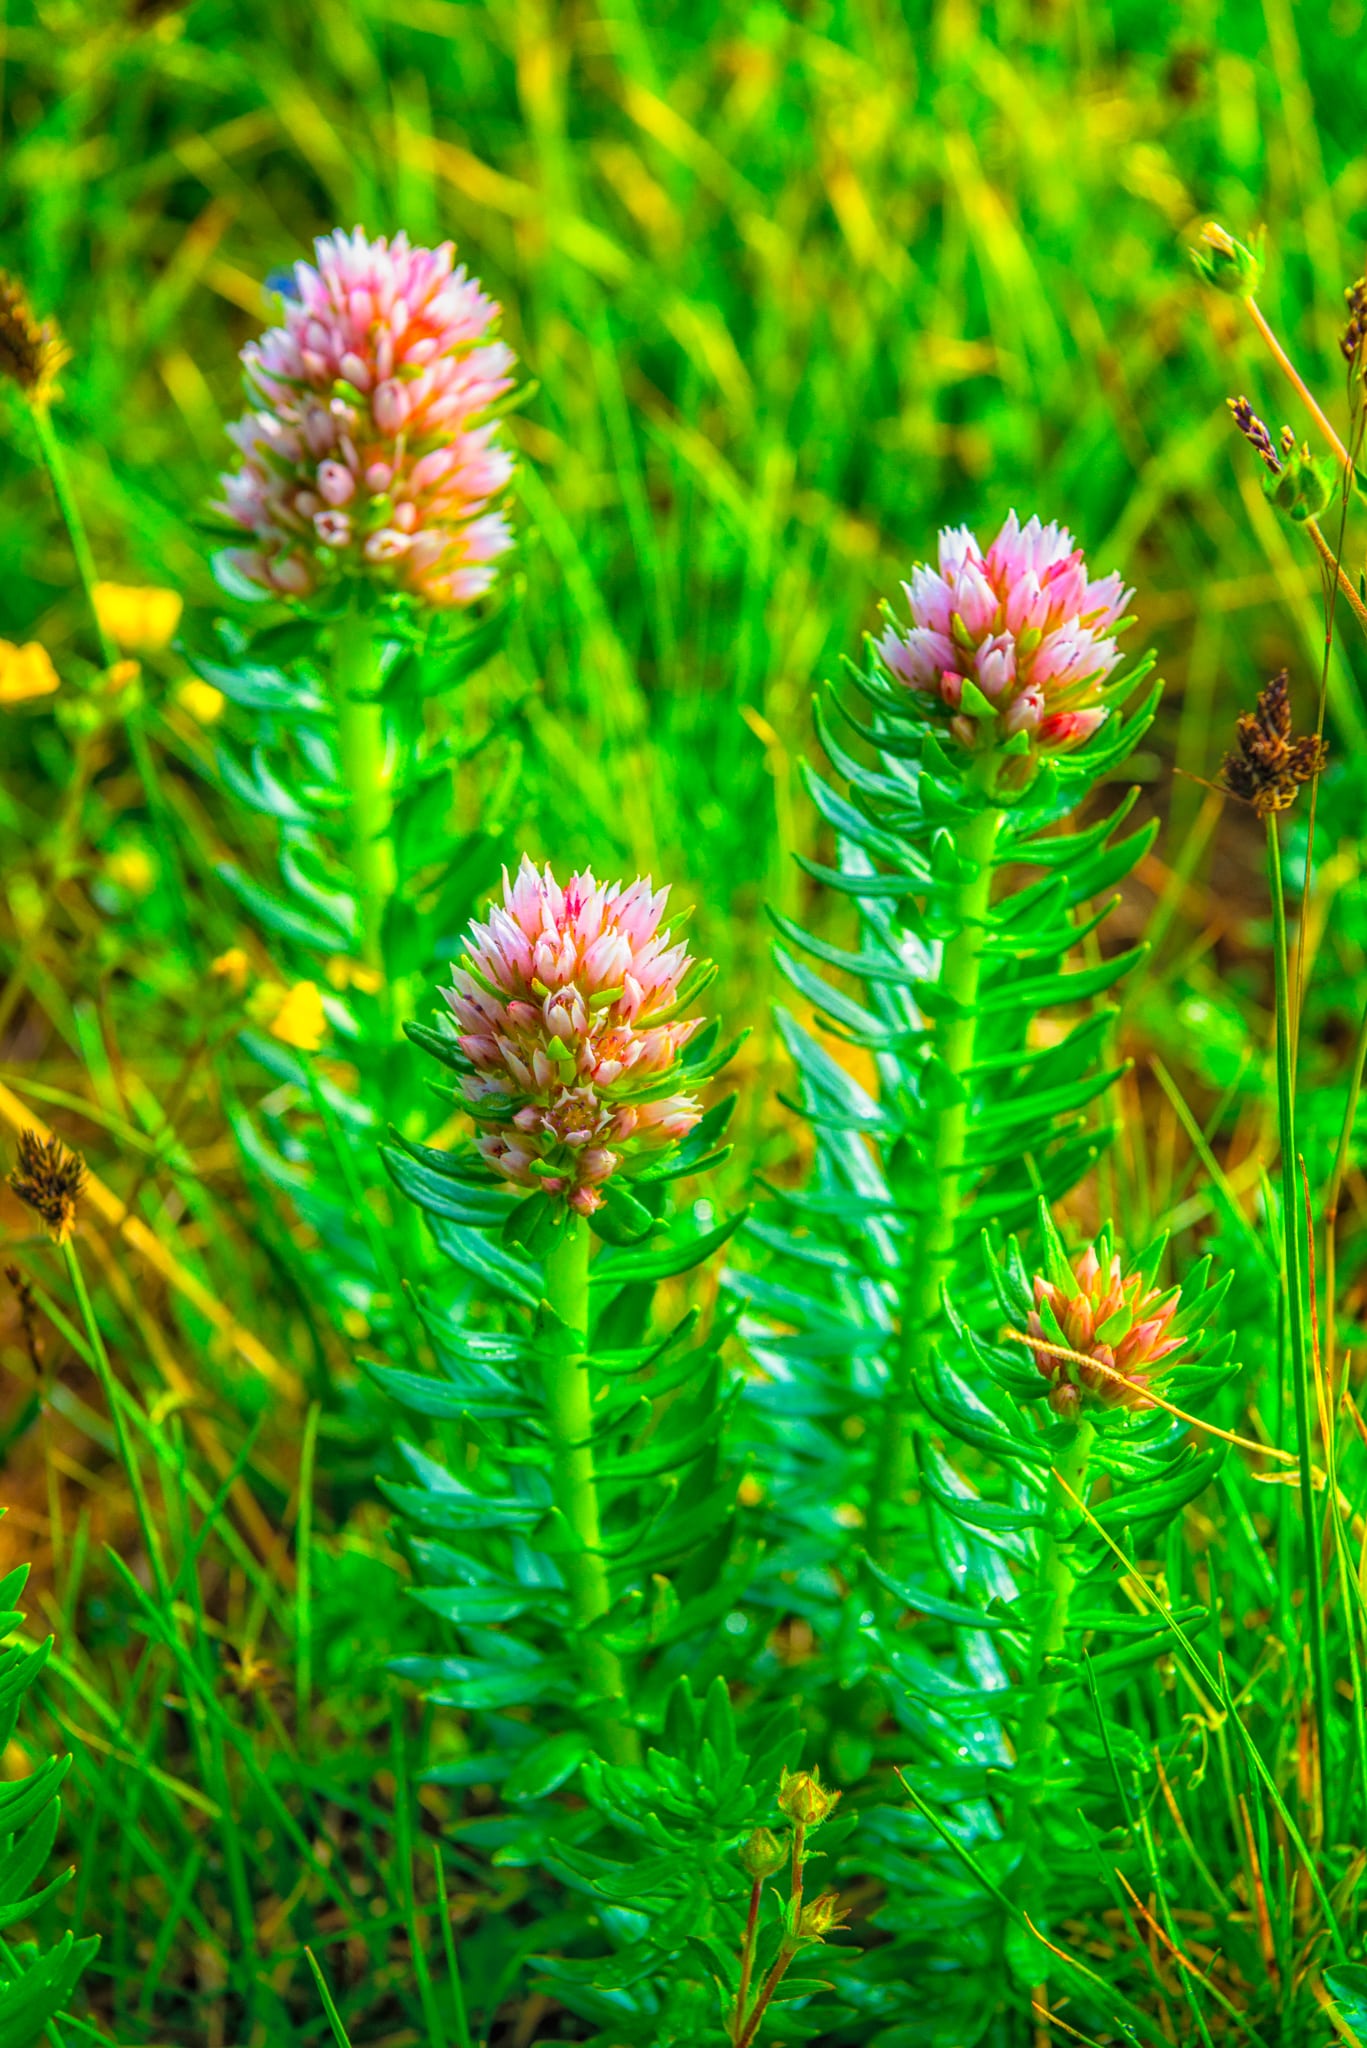 Queens Crown is a sedum with delicate pink flowers. This example was found along FS 815, also called Clear Lake Road, near Silverton, Colorado.